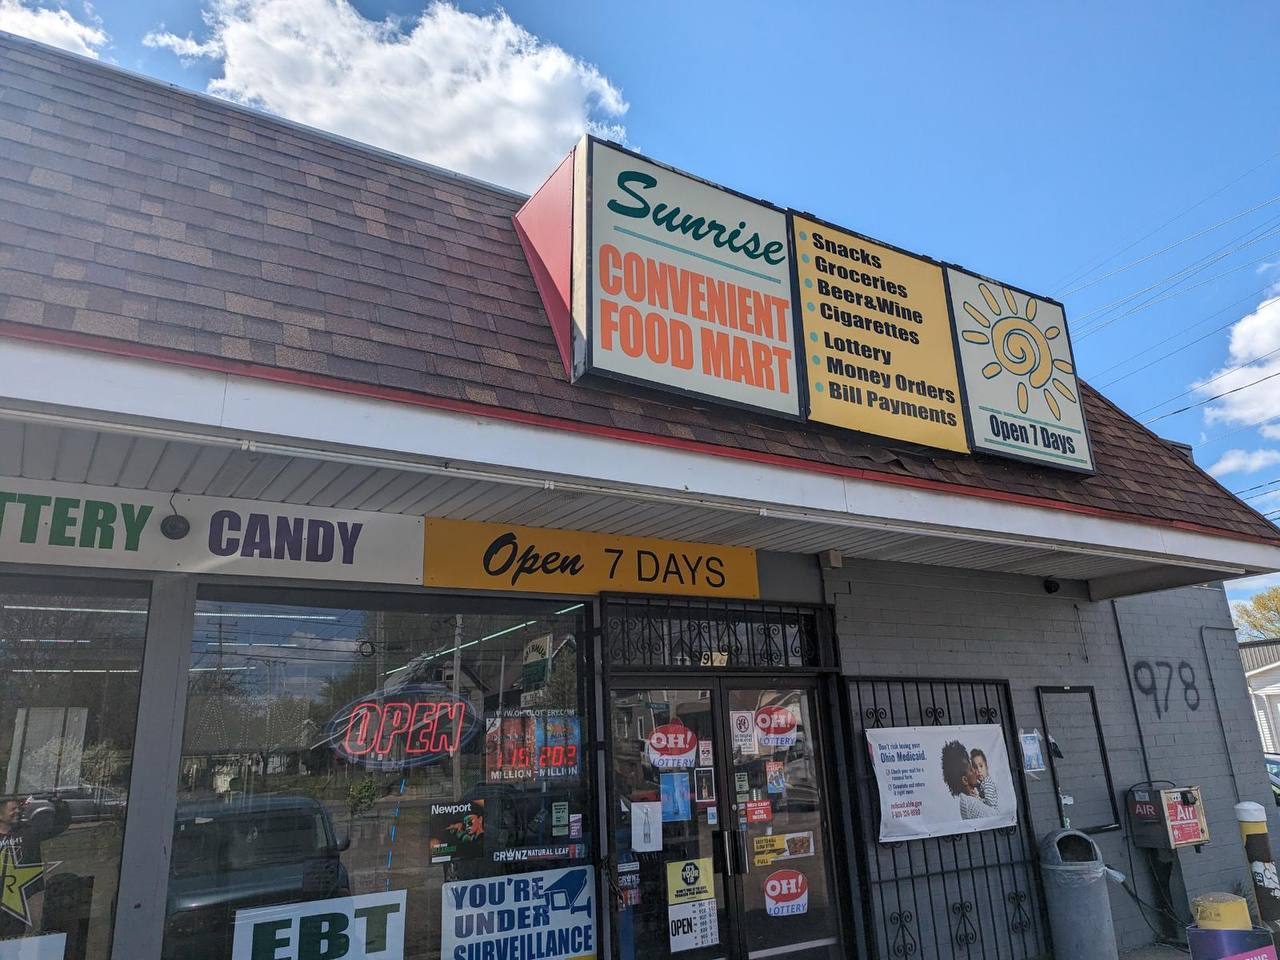 Getcoins - Bitcoin ATM - Inside of Sunrise Convenience Food Mart in Akron, Ohio